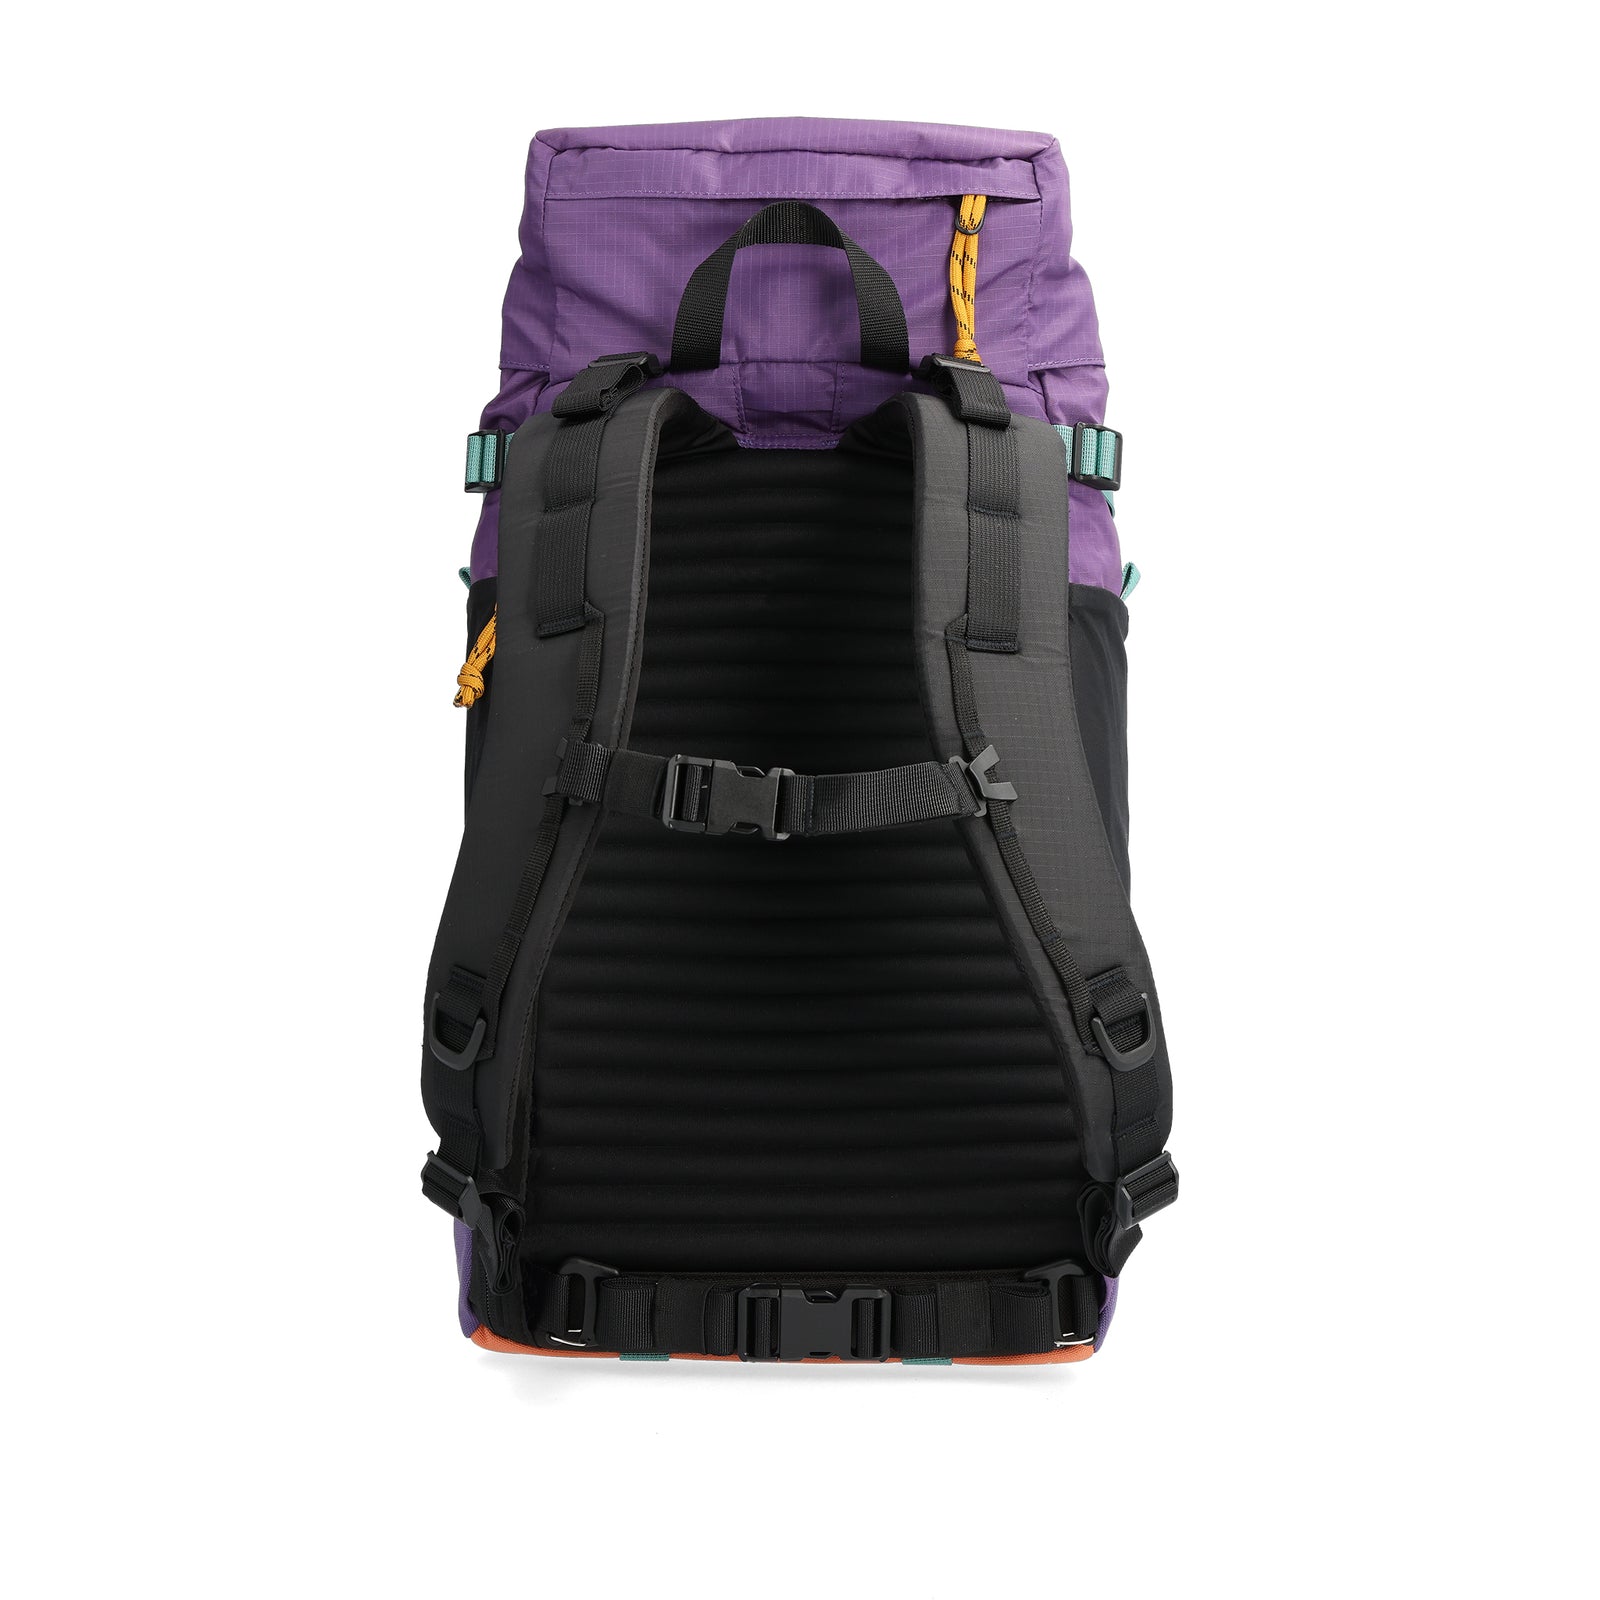 Back View of Topo Designs Mountain Pack 16L 2.0 in "Loganberry / Bone White"